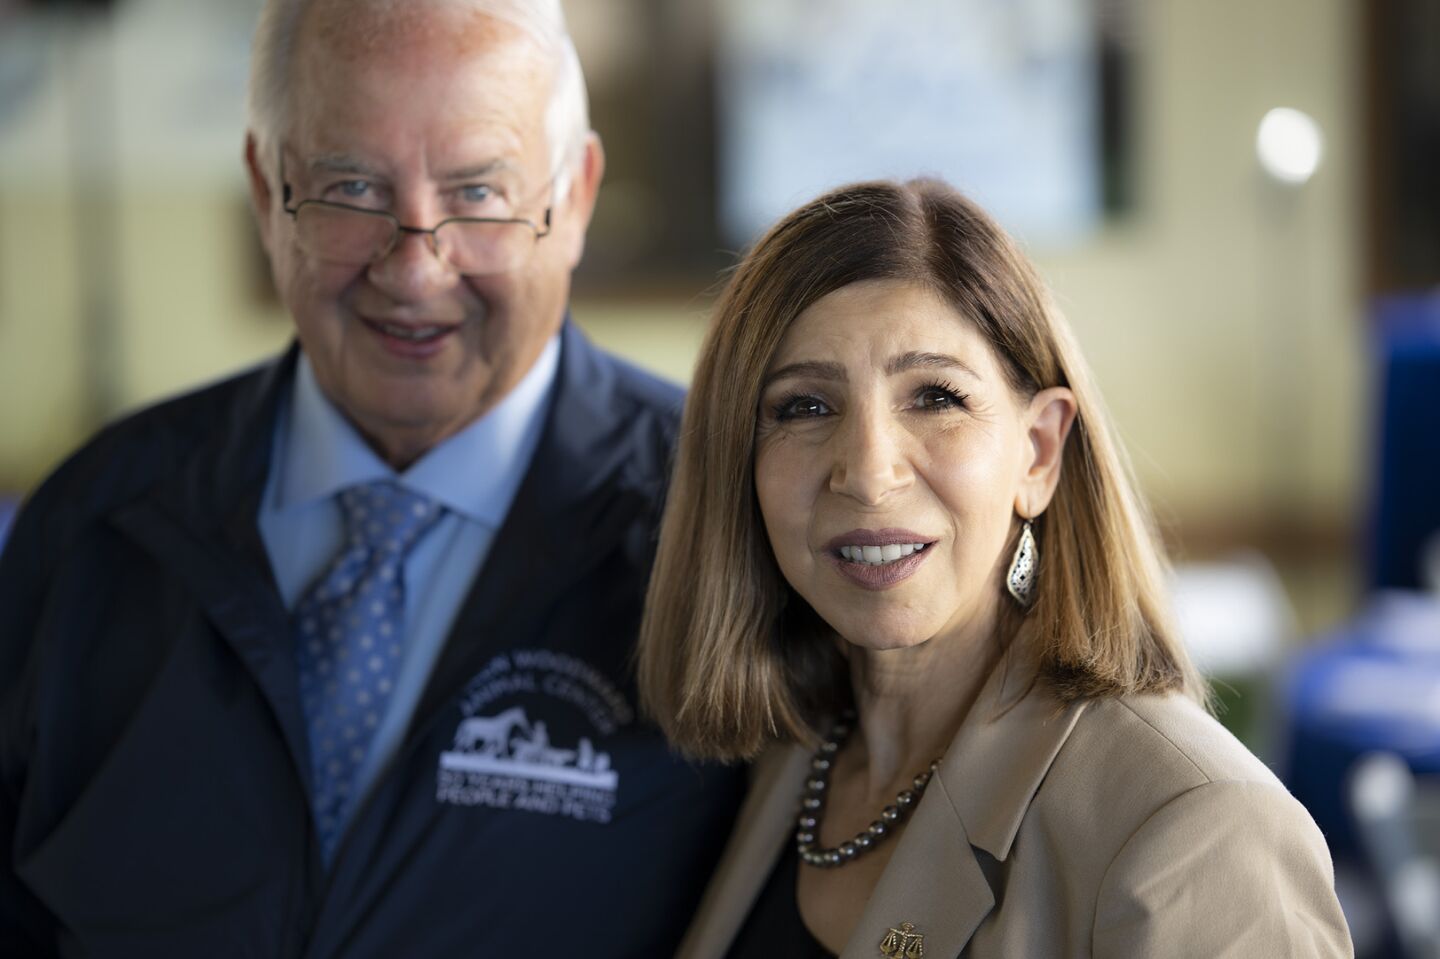 HWAC Pres & CEO Mike Arms, SD District Attorney Summer Stephan